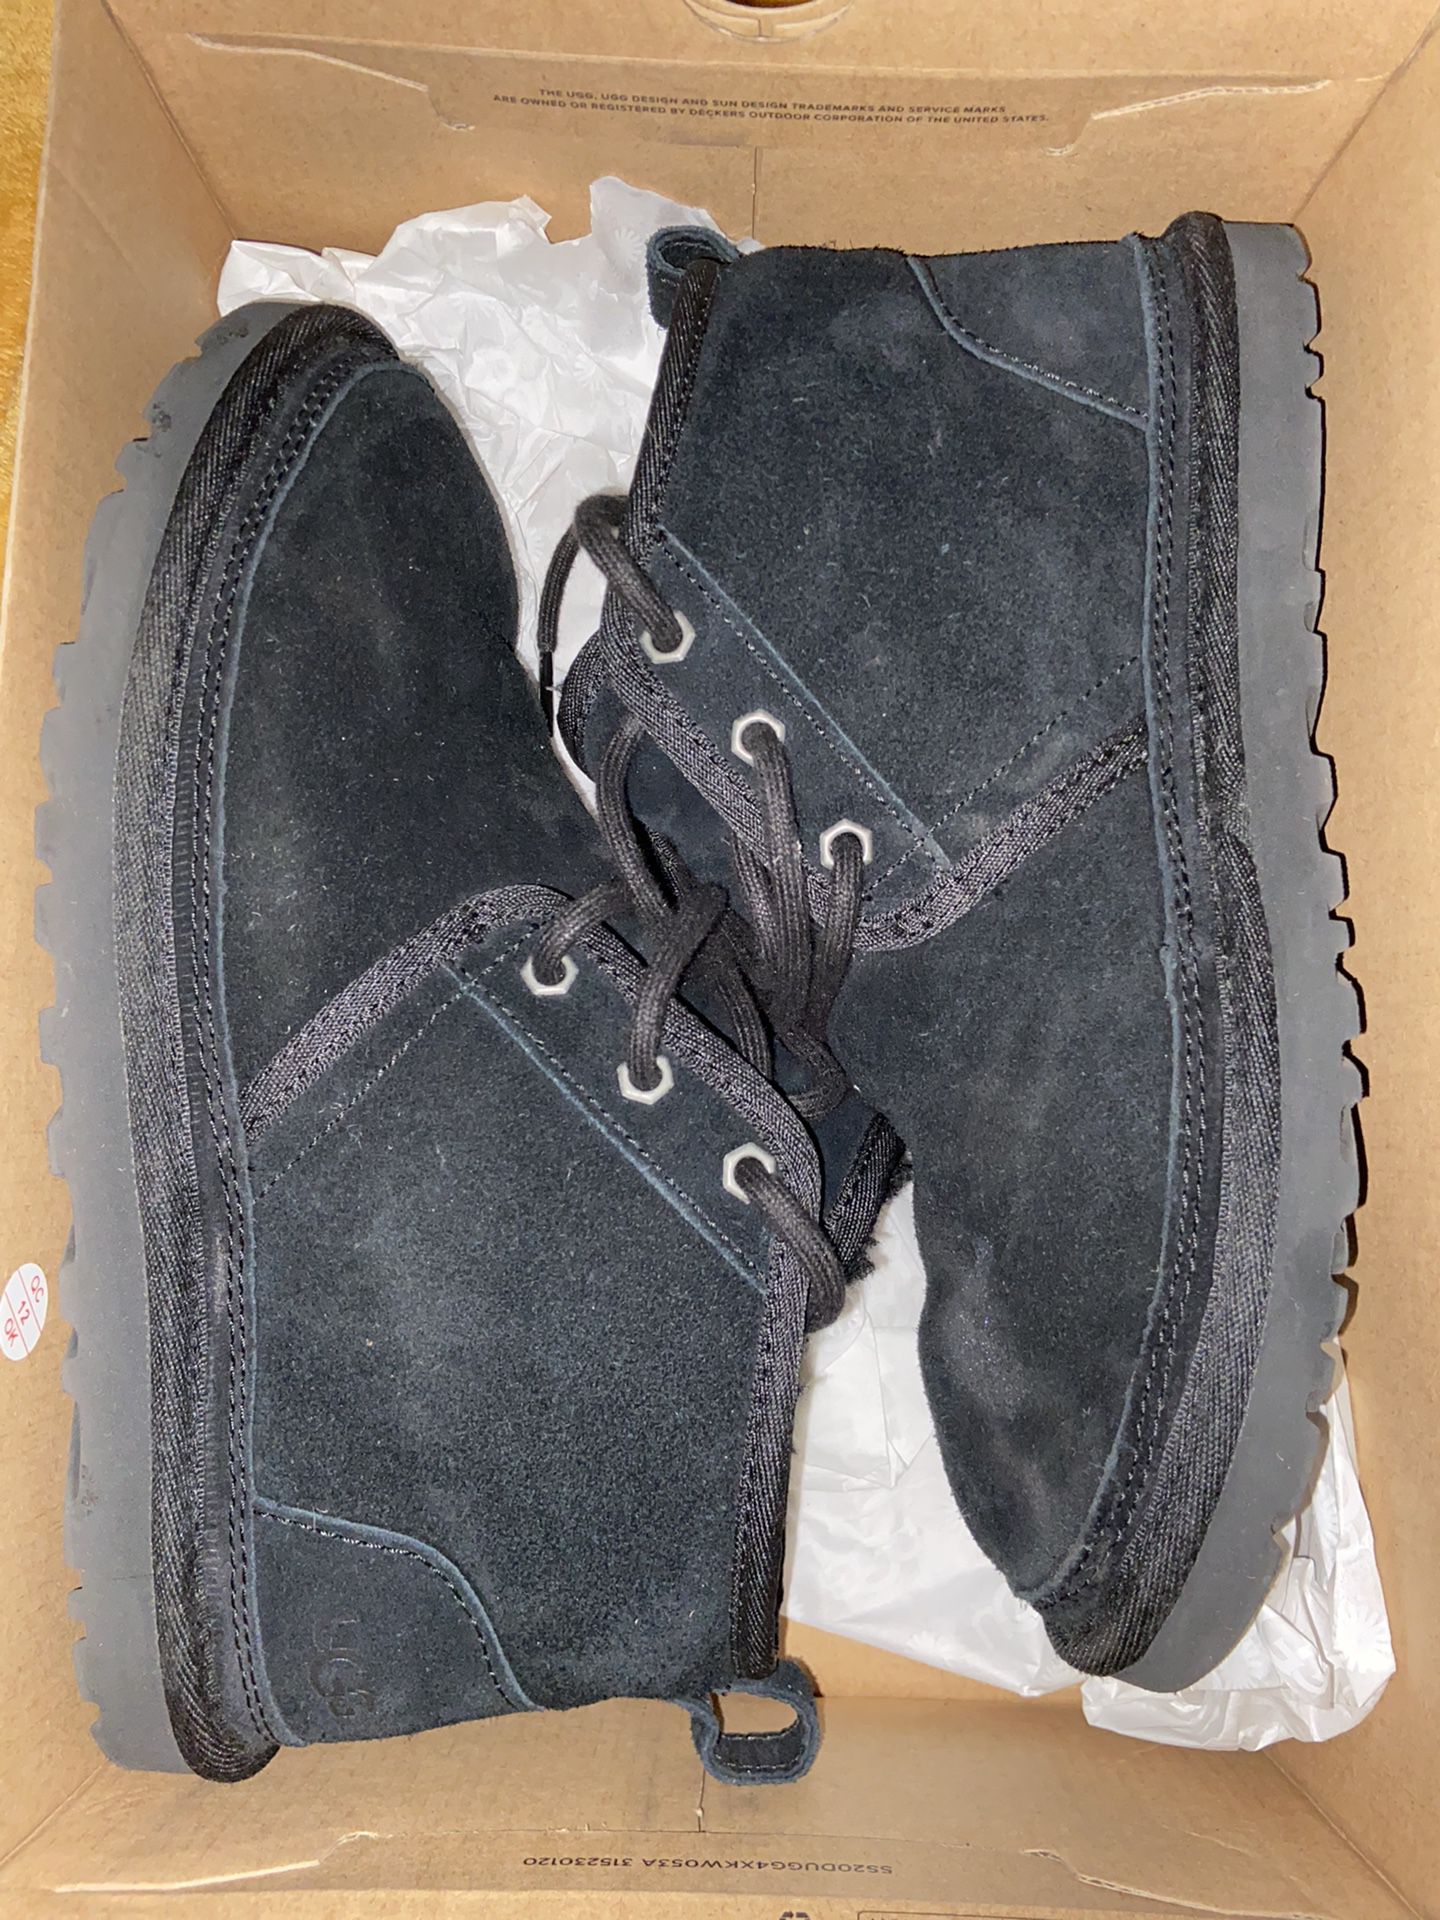 Black men uggs size 8 used mostly in good condition 